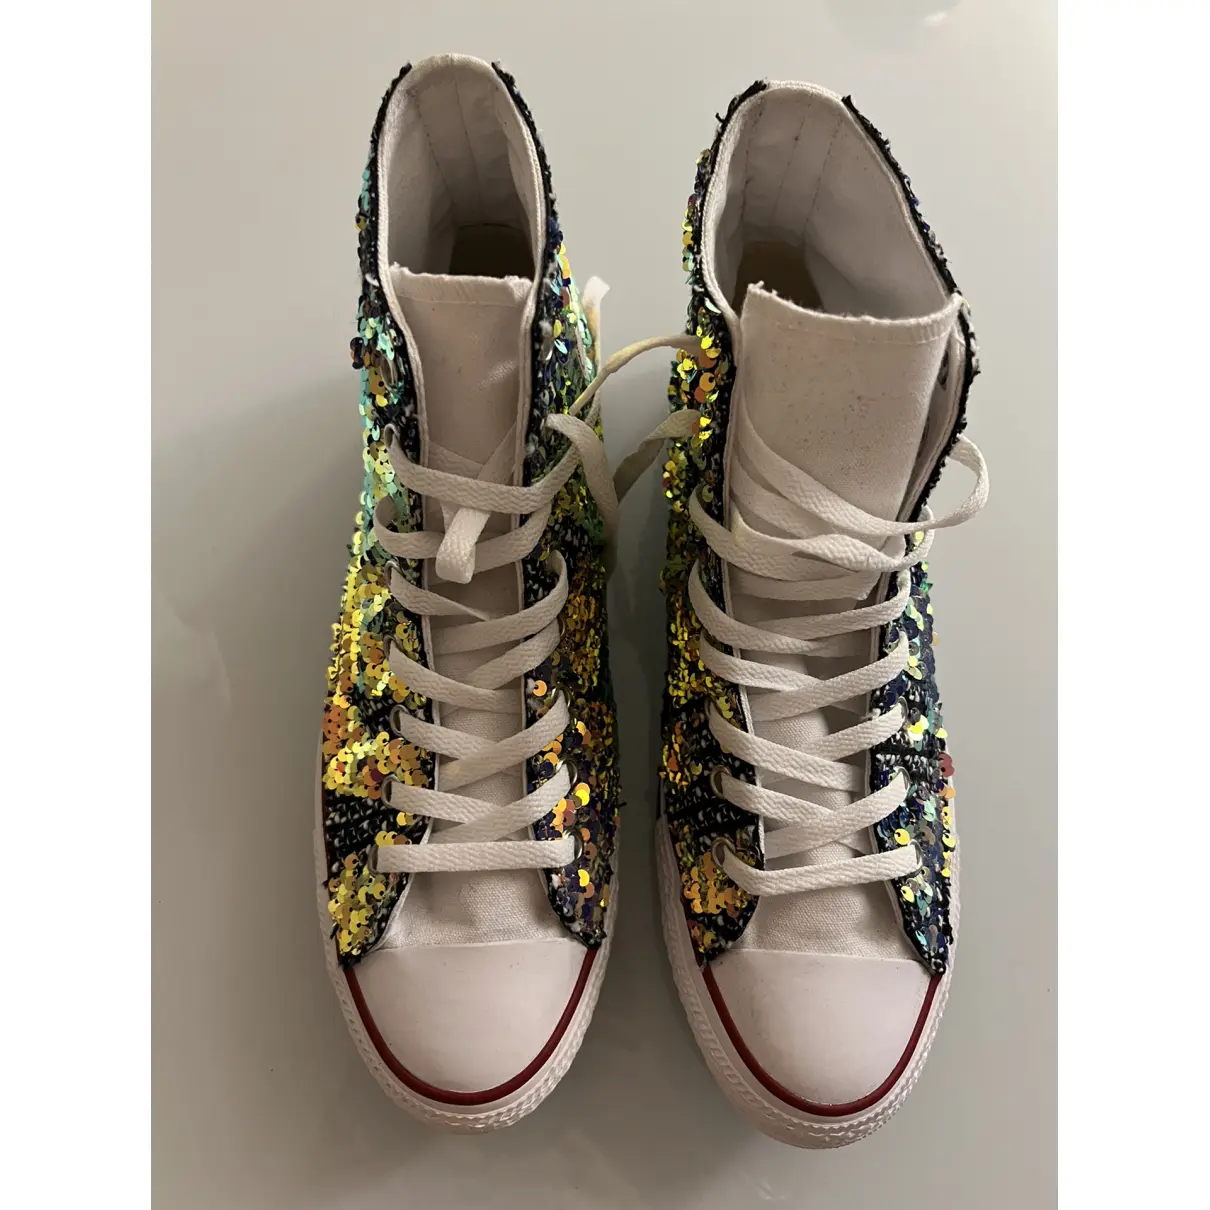 Buy Converse Glitter high trainers online